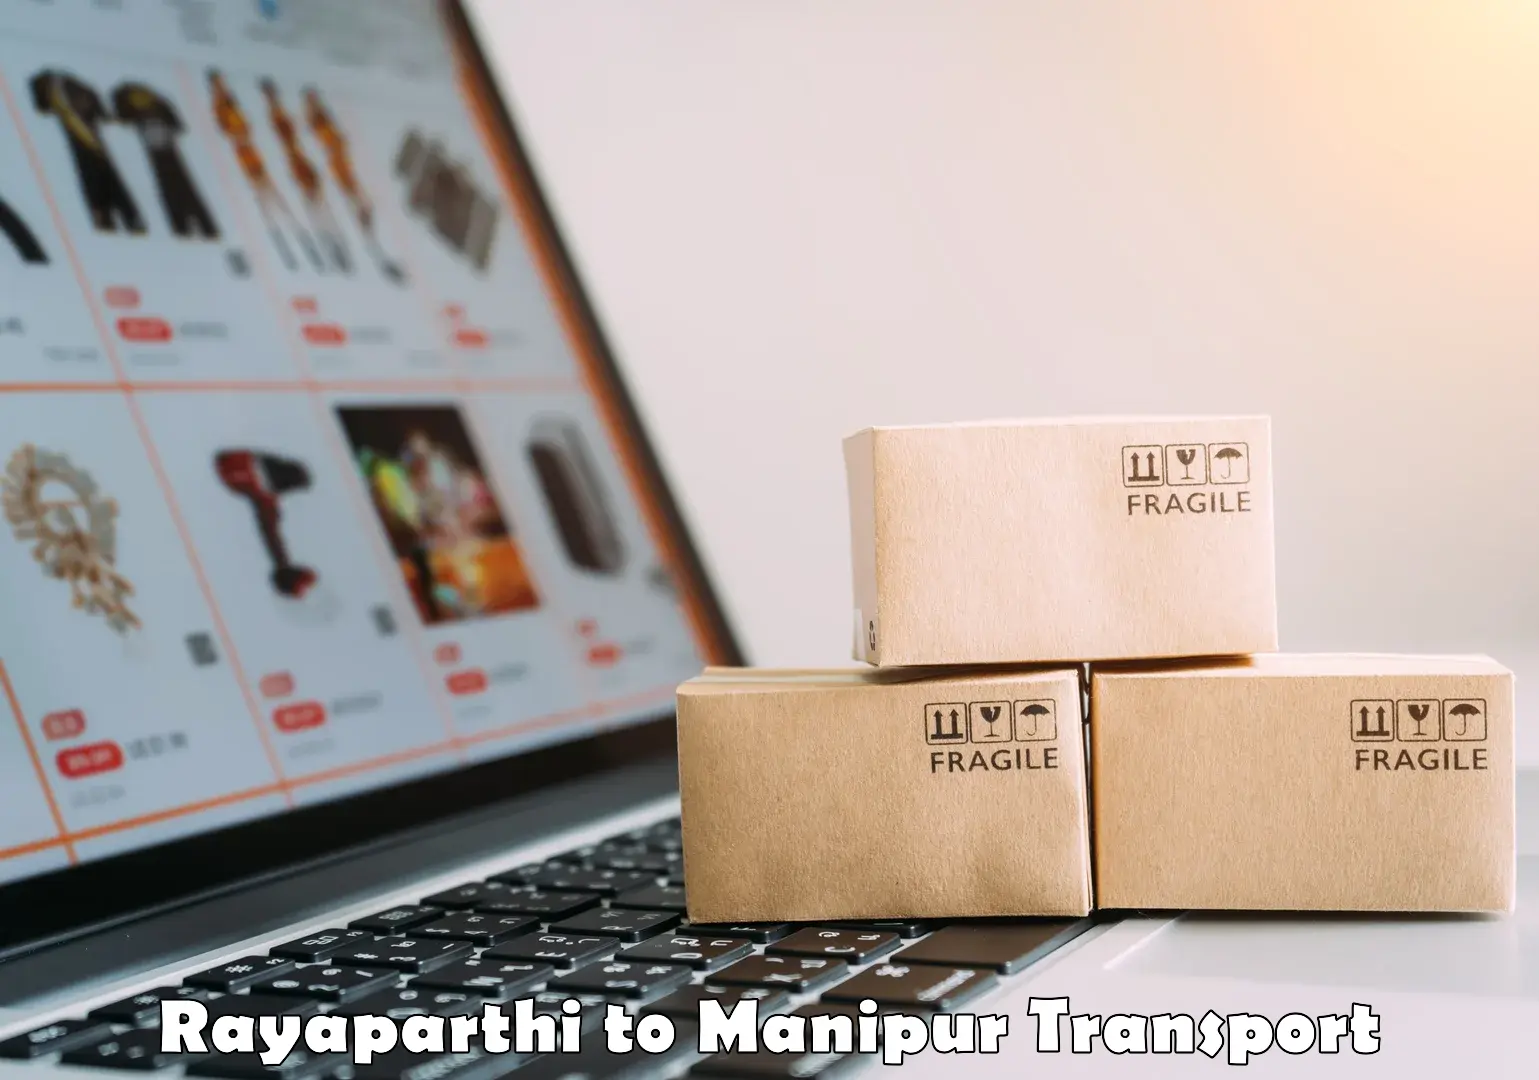 Daily transport service in Rayaparthi to Manipur